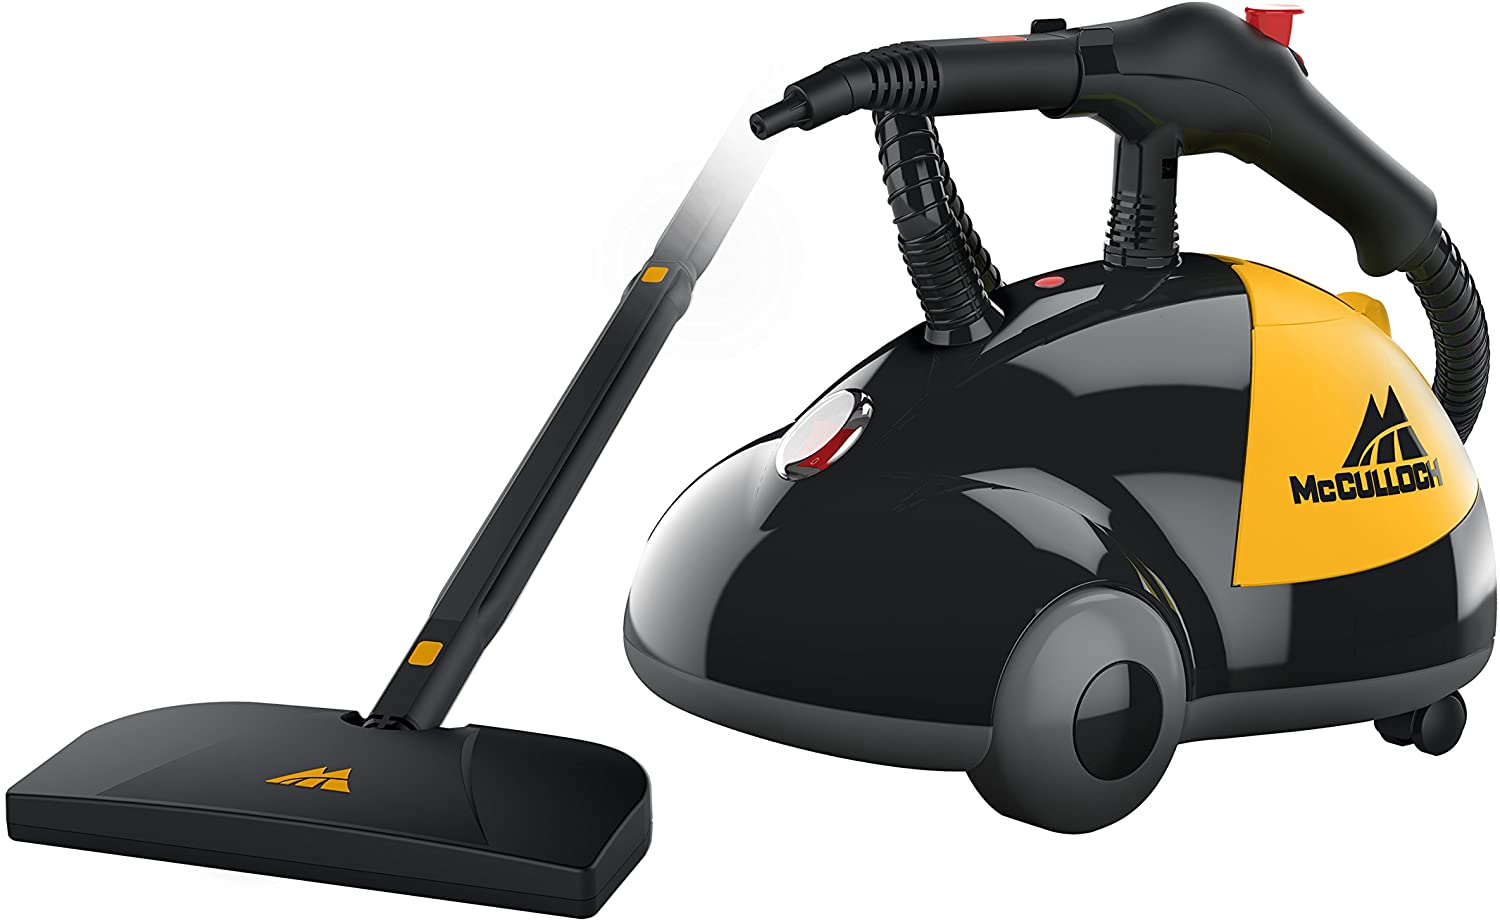 McCulloch MC1275 Heavy-Duty Steam Cleaner with 18 Accessories, Extra-Long Power Cord, Chemical-Free Pressurized Cleaning for Most Floors, Counters, Appliances, Windows, Autos, and More